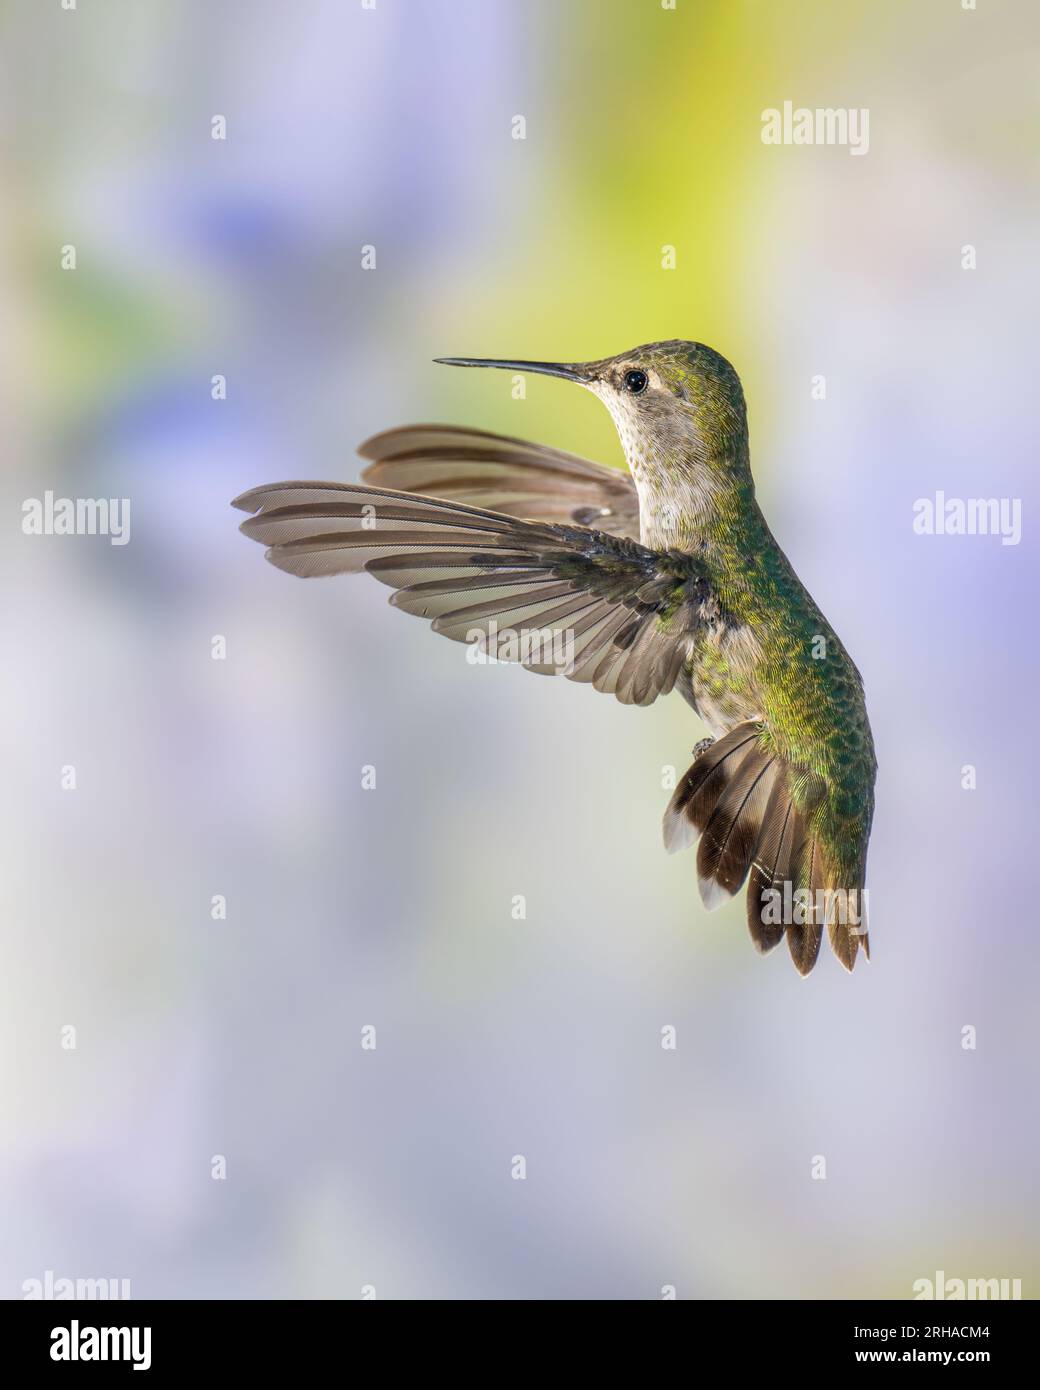 Hummingbird in Flight on Green and Violet Background, Female or Immature Male Stock Photo